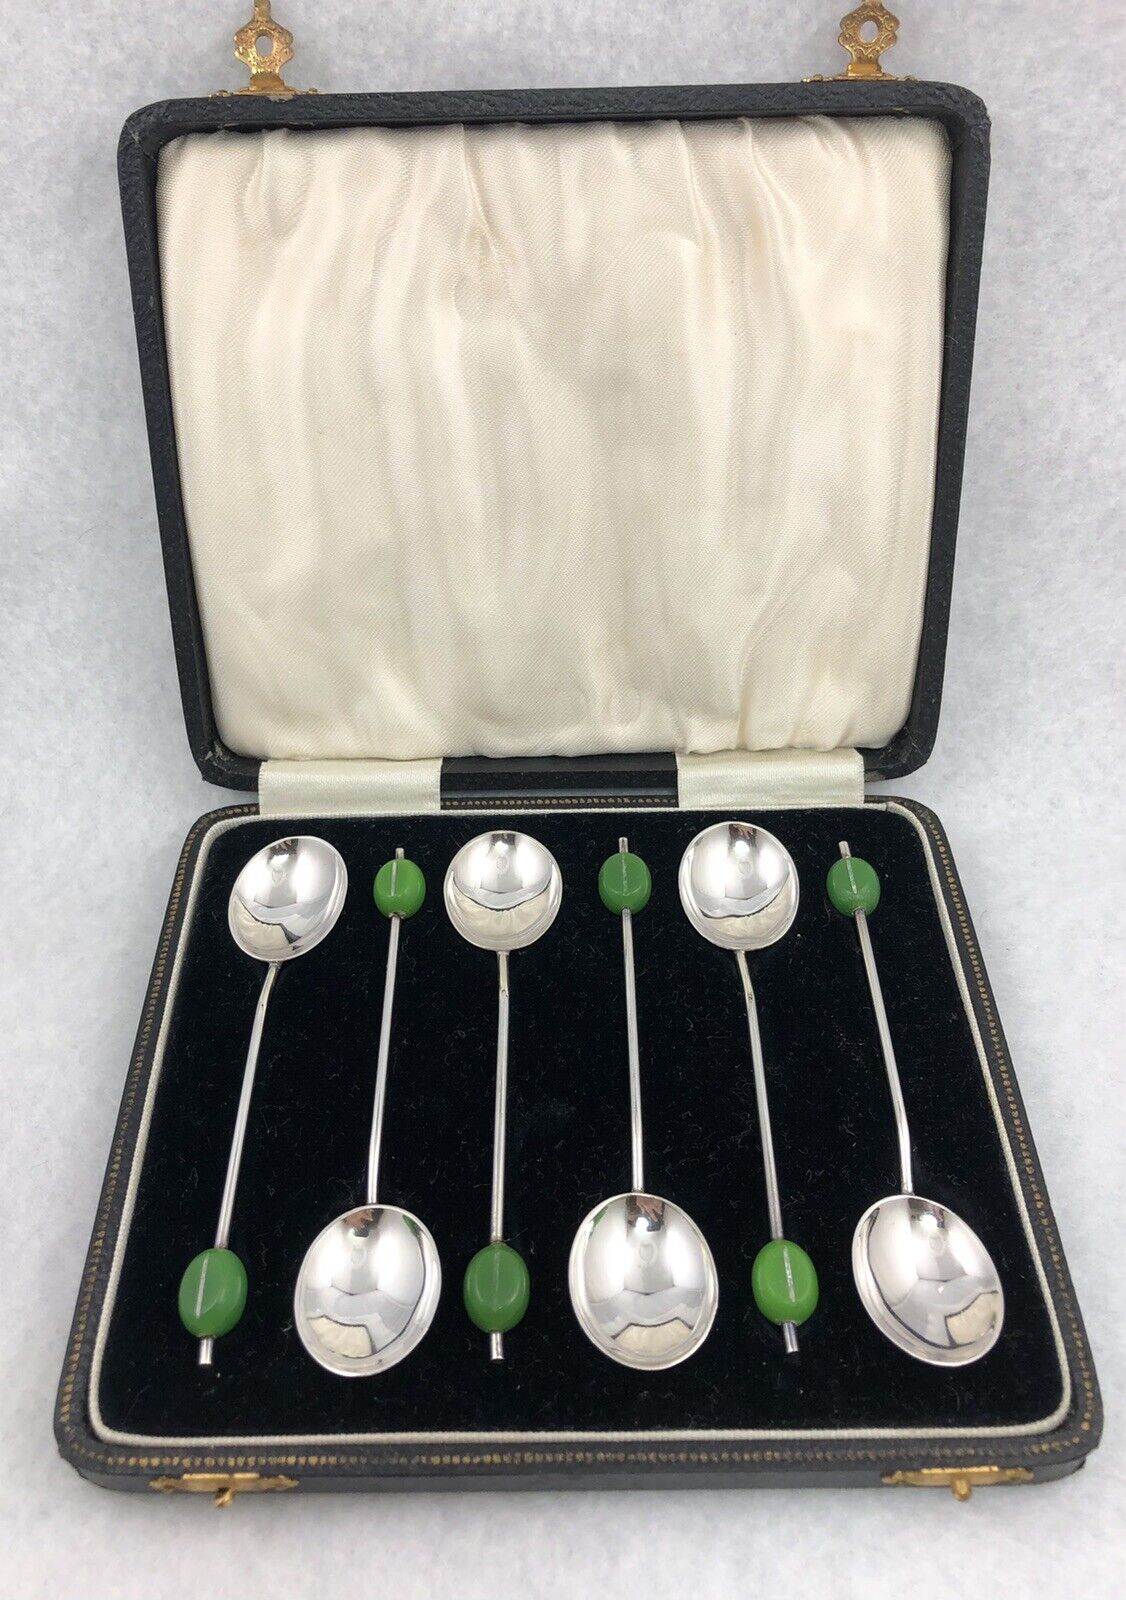 Antique Valuations: Vintage Green Bakelite Coffee Bean Demitasse Spoons EPNS - Set of 6 with Case